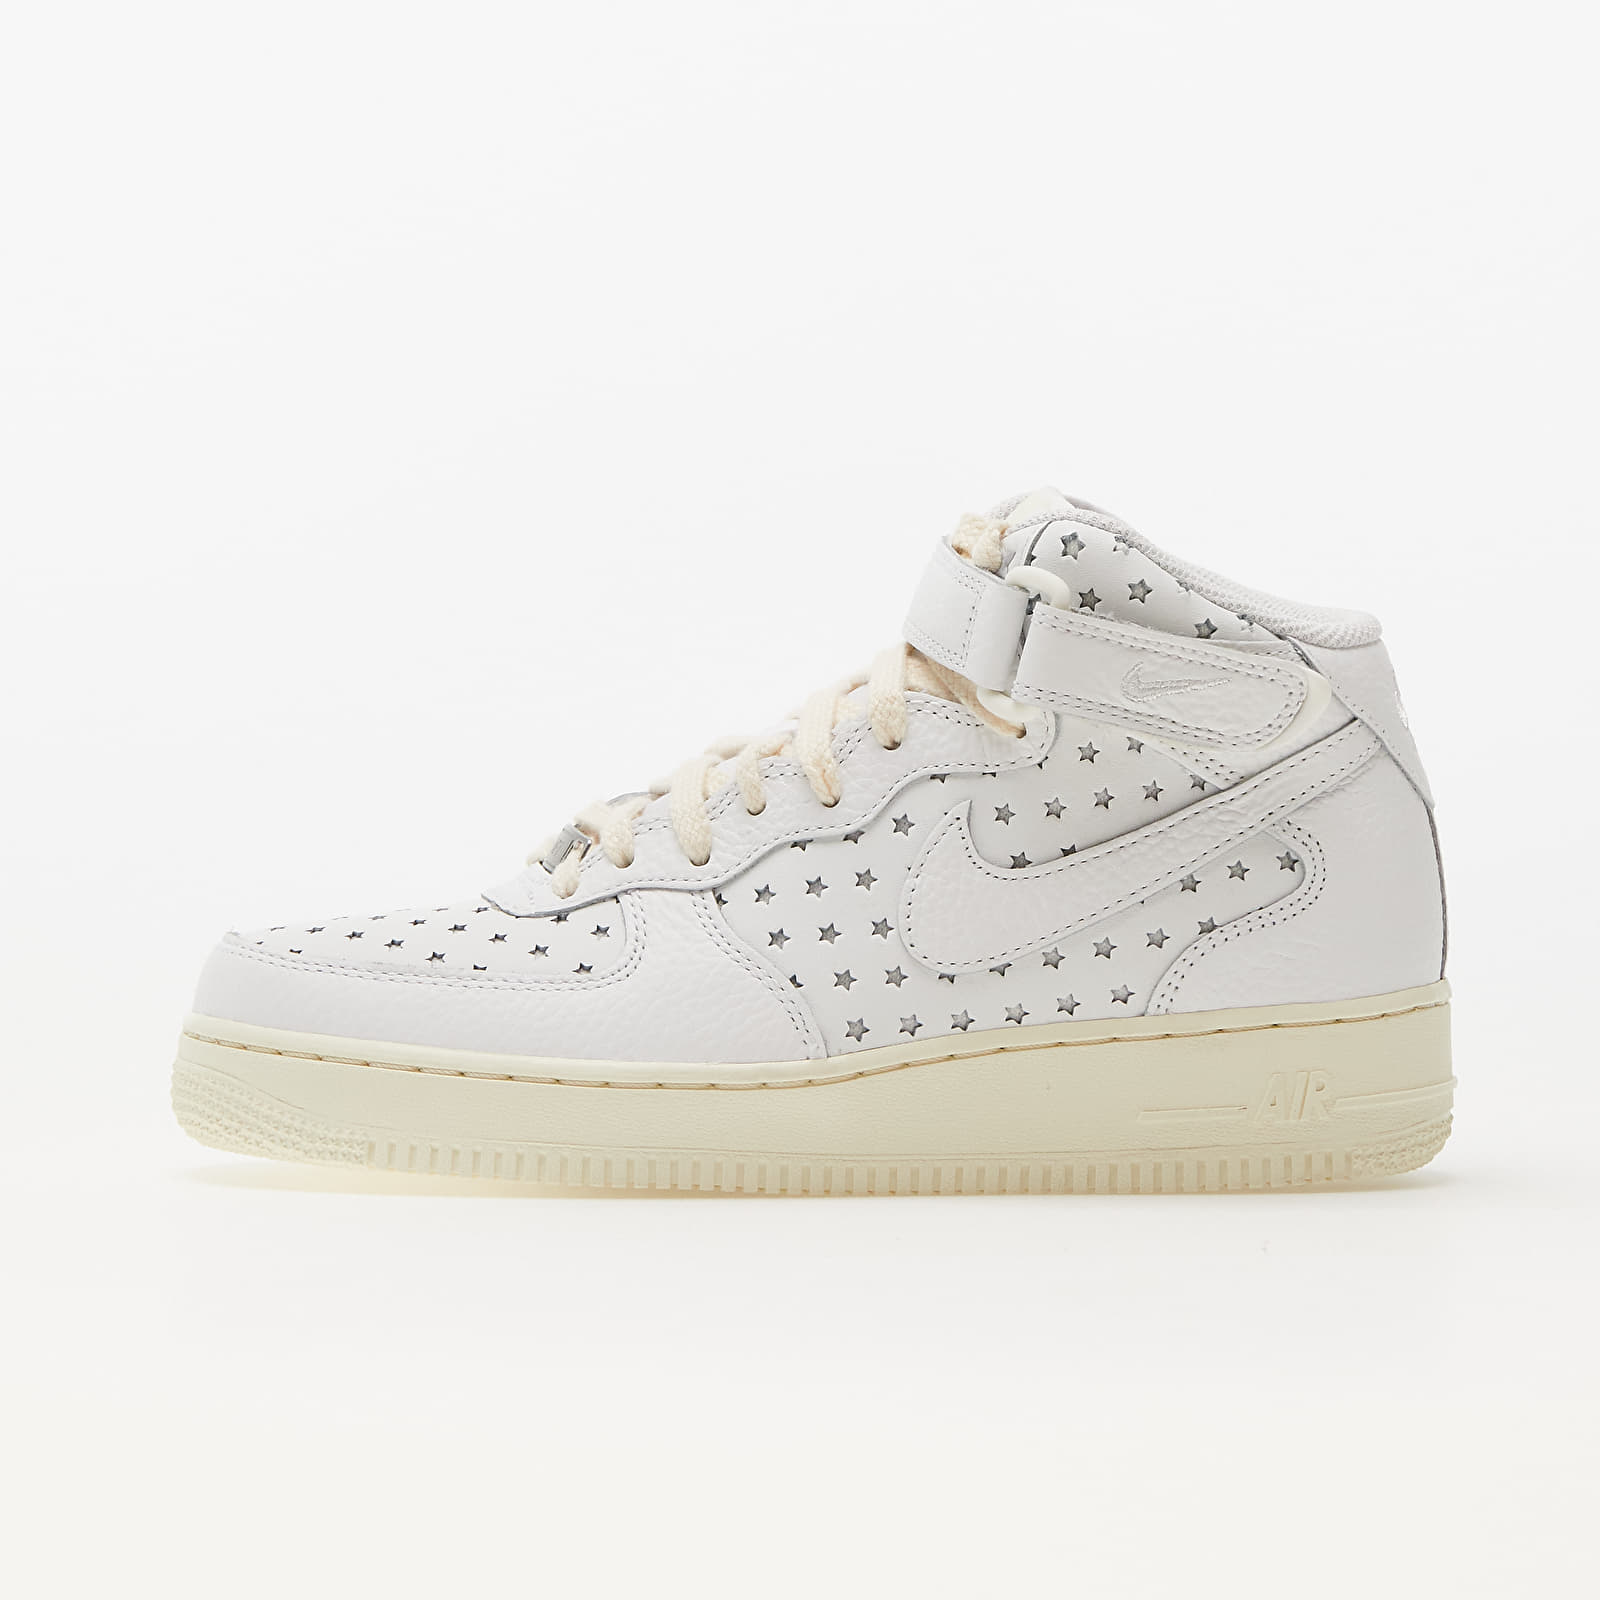 Nike Wmns Air Force 1 Mid